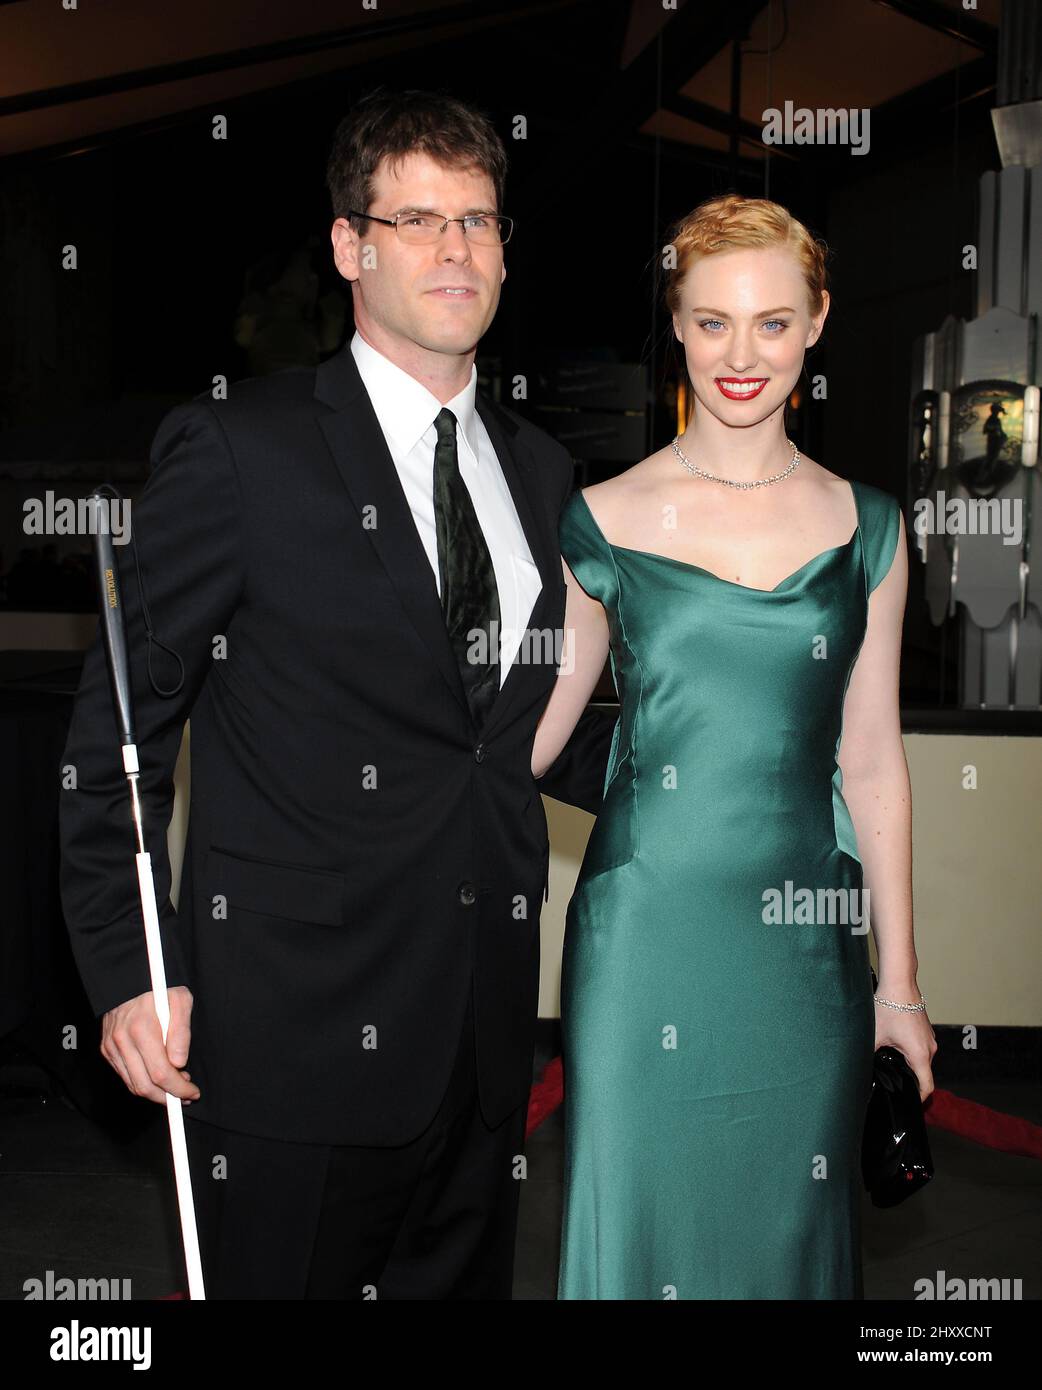 Deborah Ann Woll and E.J. Scott attends the Directors Guild Awards 2012 in the Grand Ballroom at Hollywood & Highland in Hollywood, California Stock Photo